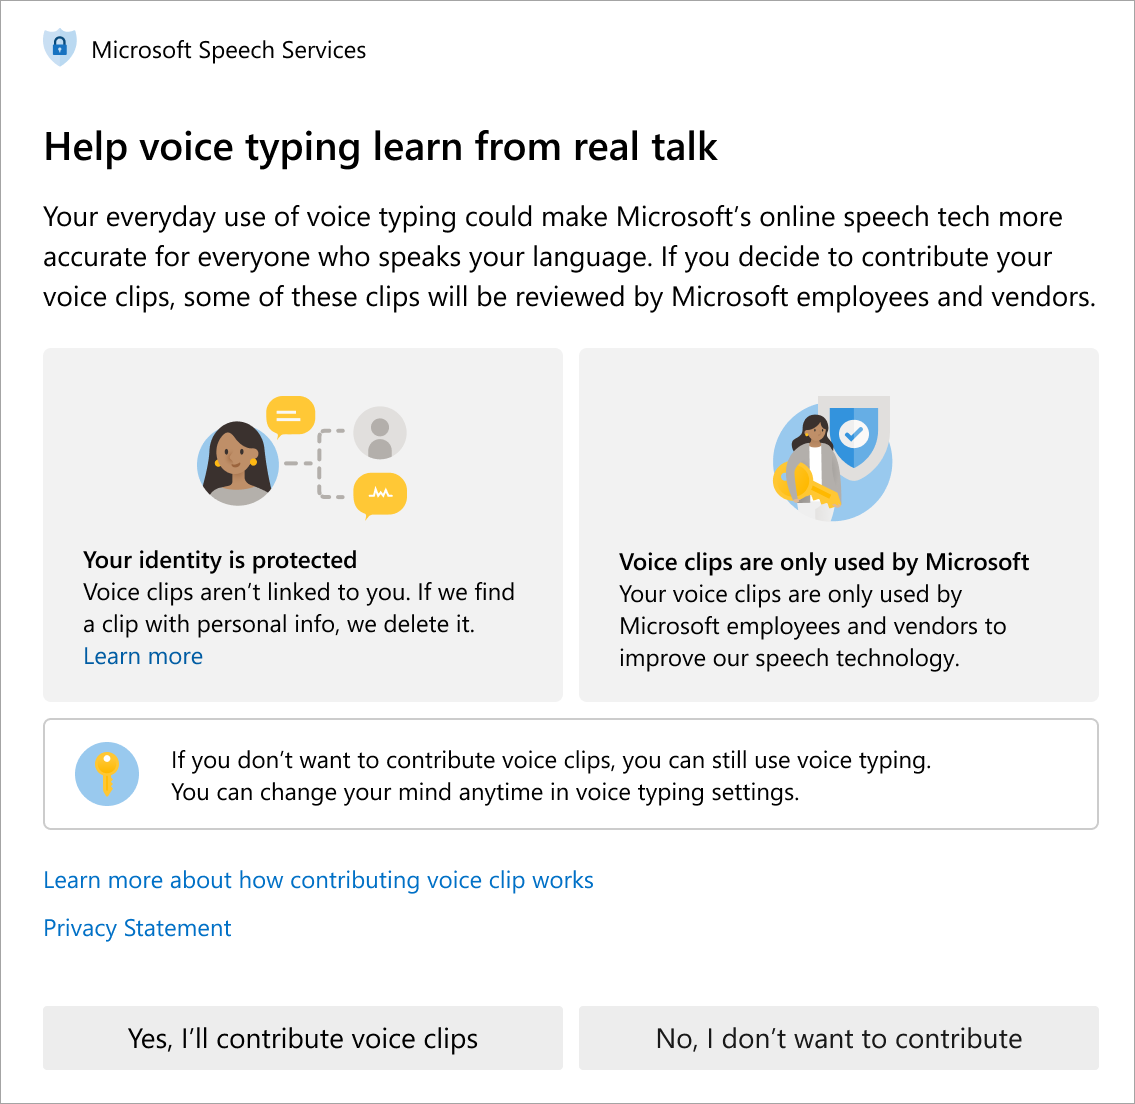 Start or Stop Contributing Voice Clips to Microsoft in Windows 10 Microsoft-gives-users-control-over-their-voice-clips-1.png